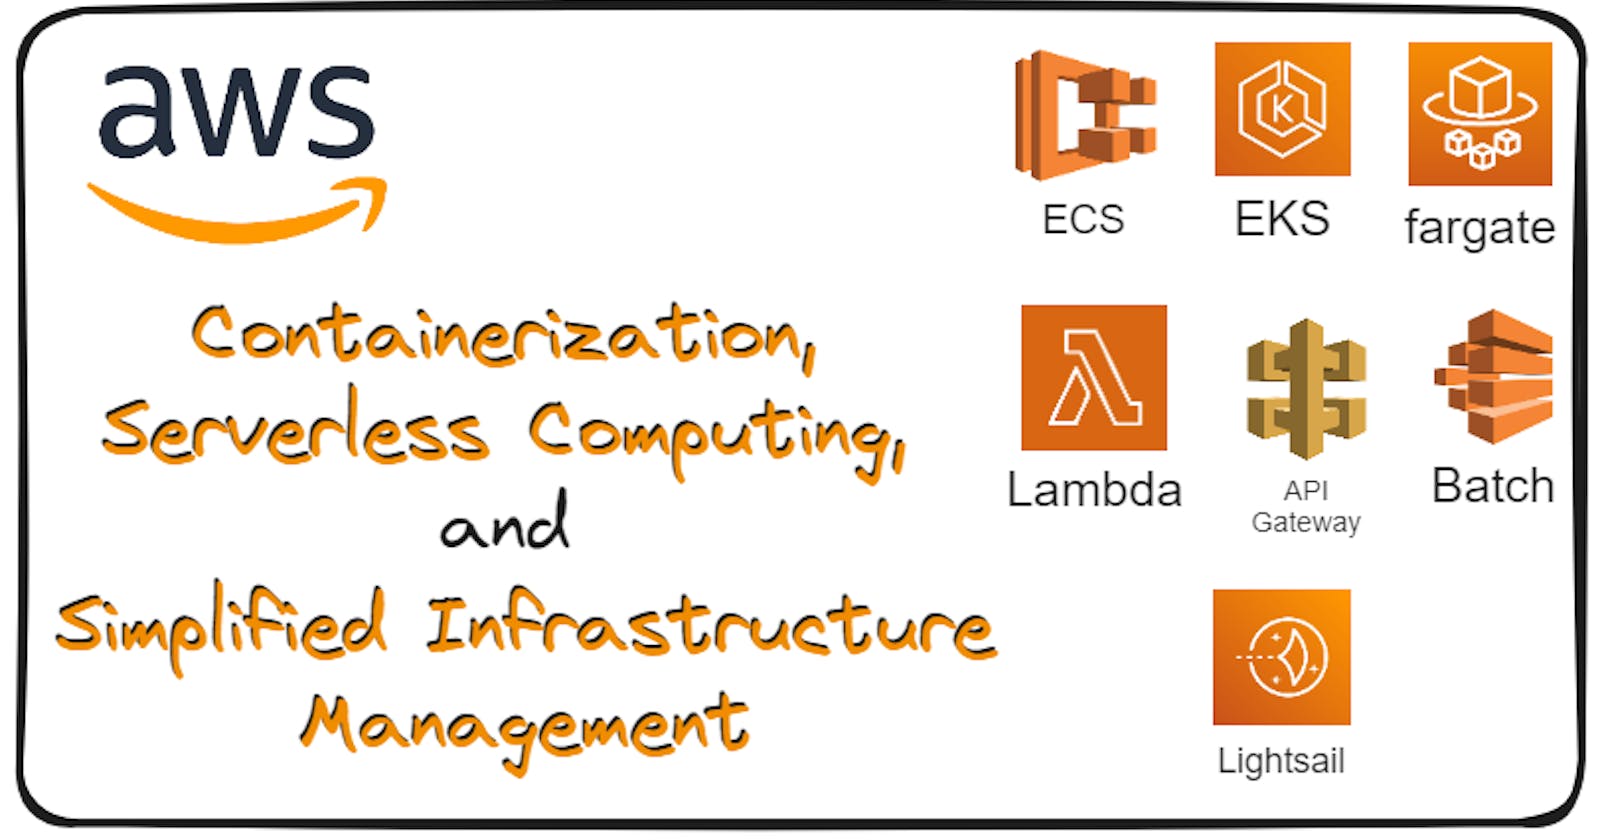 AWS Containerization, Serverless Computing, and Simplified Infrastructure Management